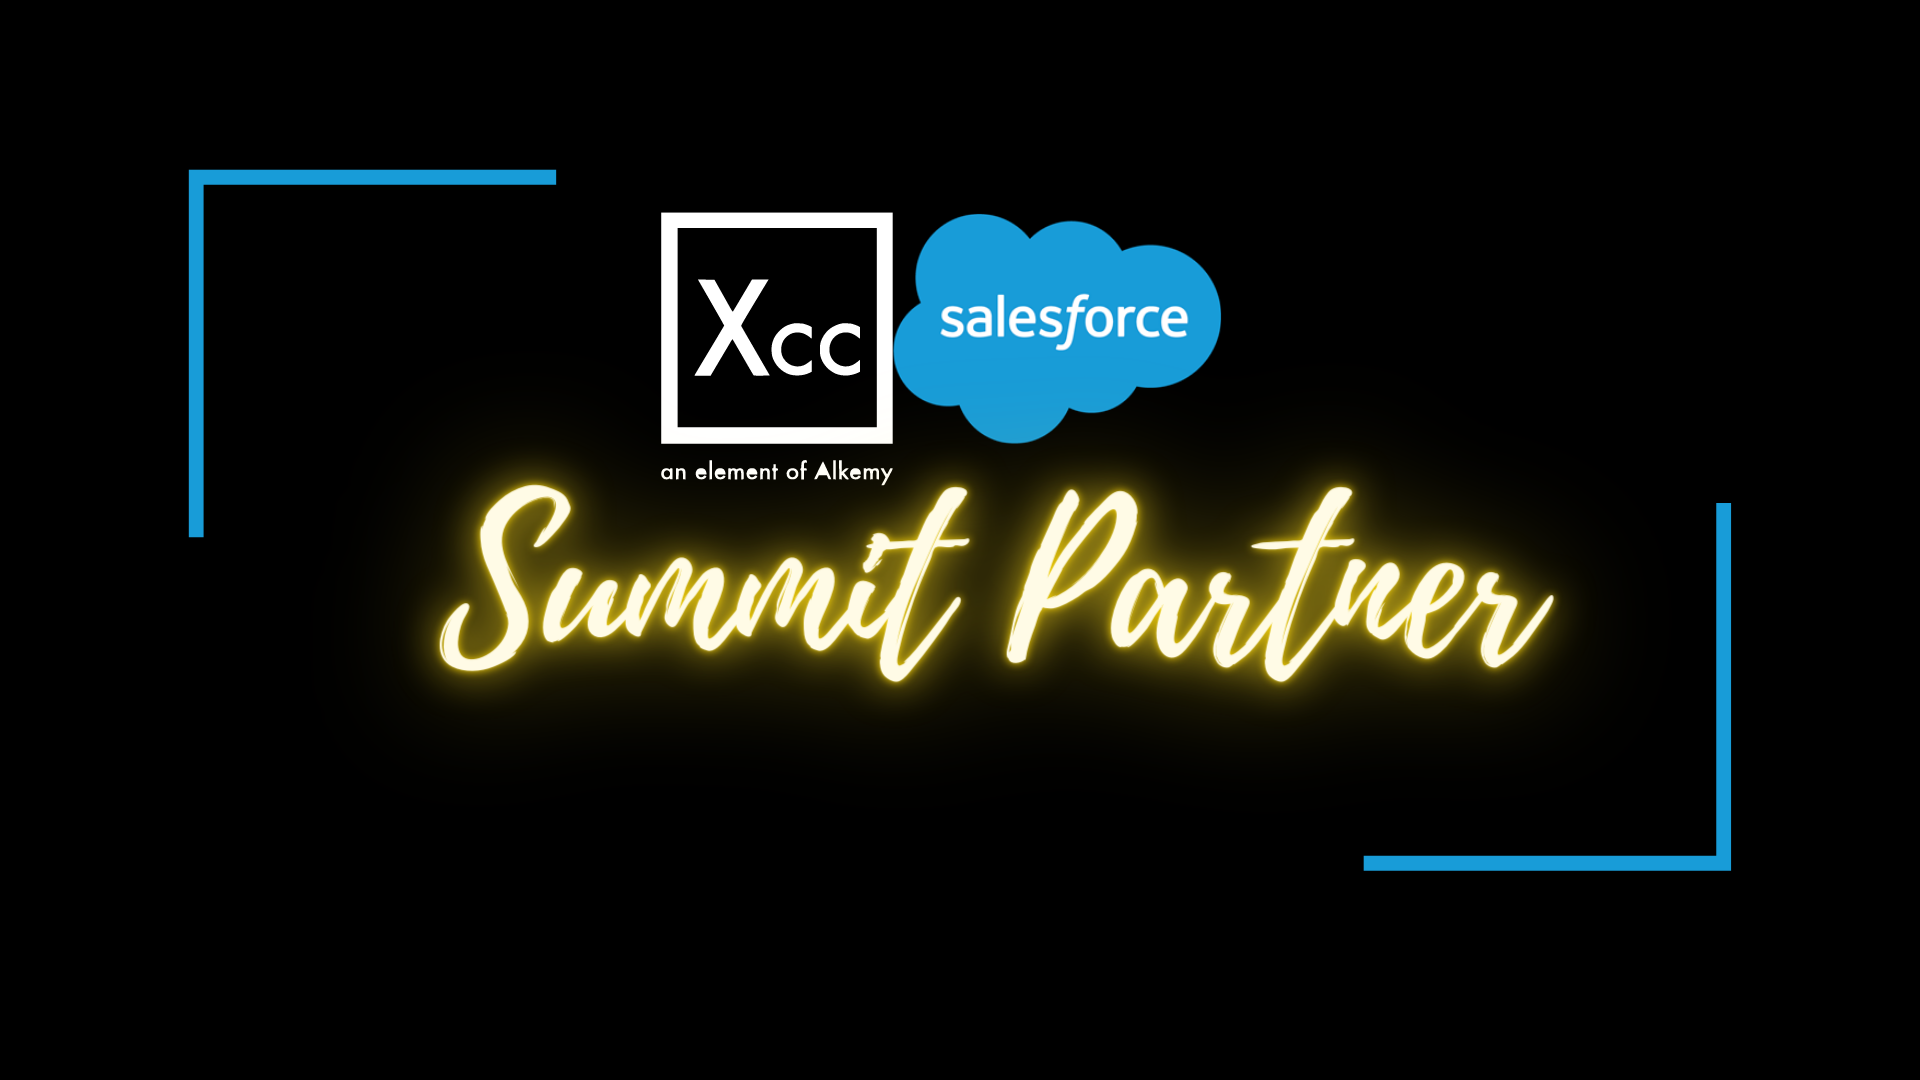 XCC – eXperience Cloud Consulting diventa Salesforce Summit Partner